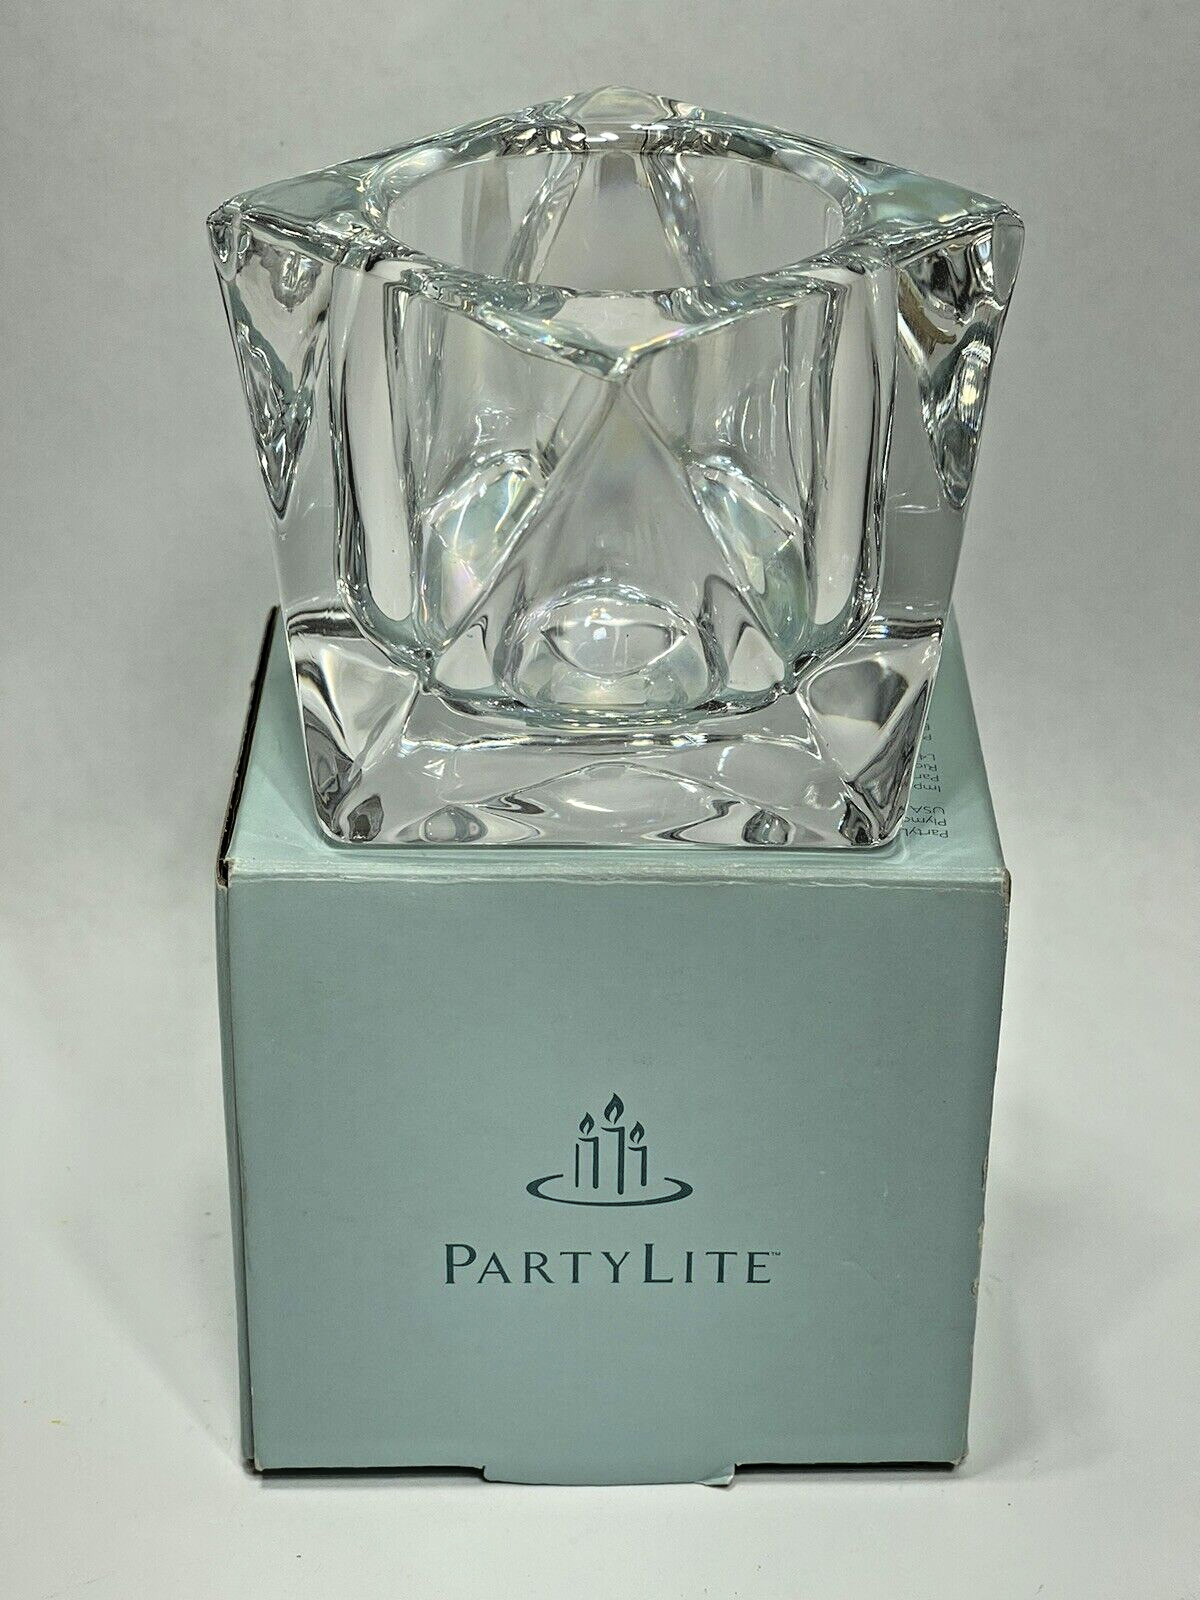 PartyLite - Discover Votive Holder Candle Holder #P8035 - Glass - NEW w/Box